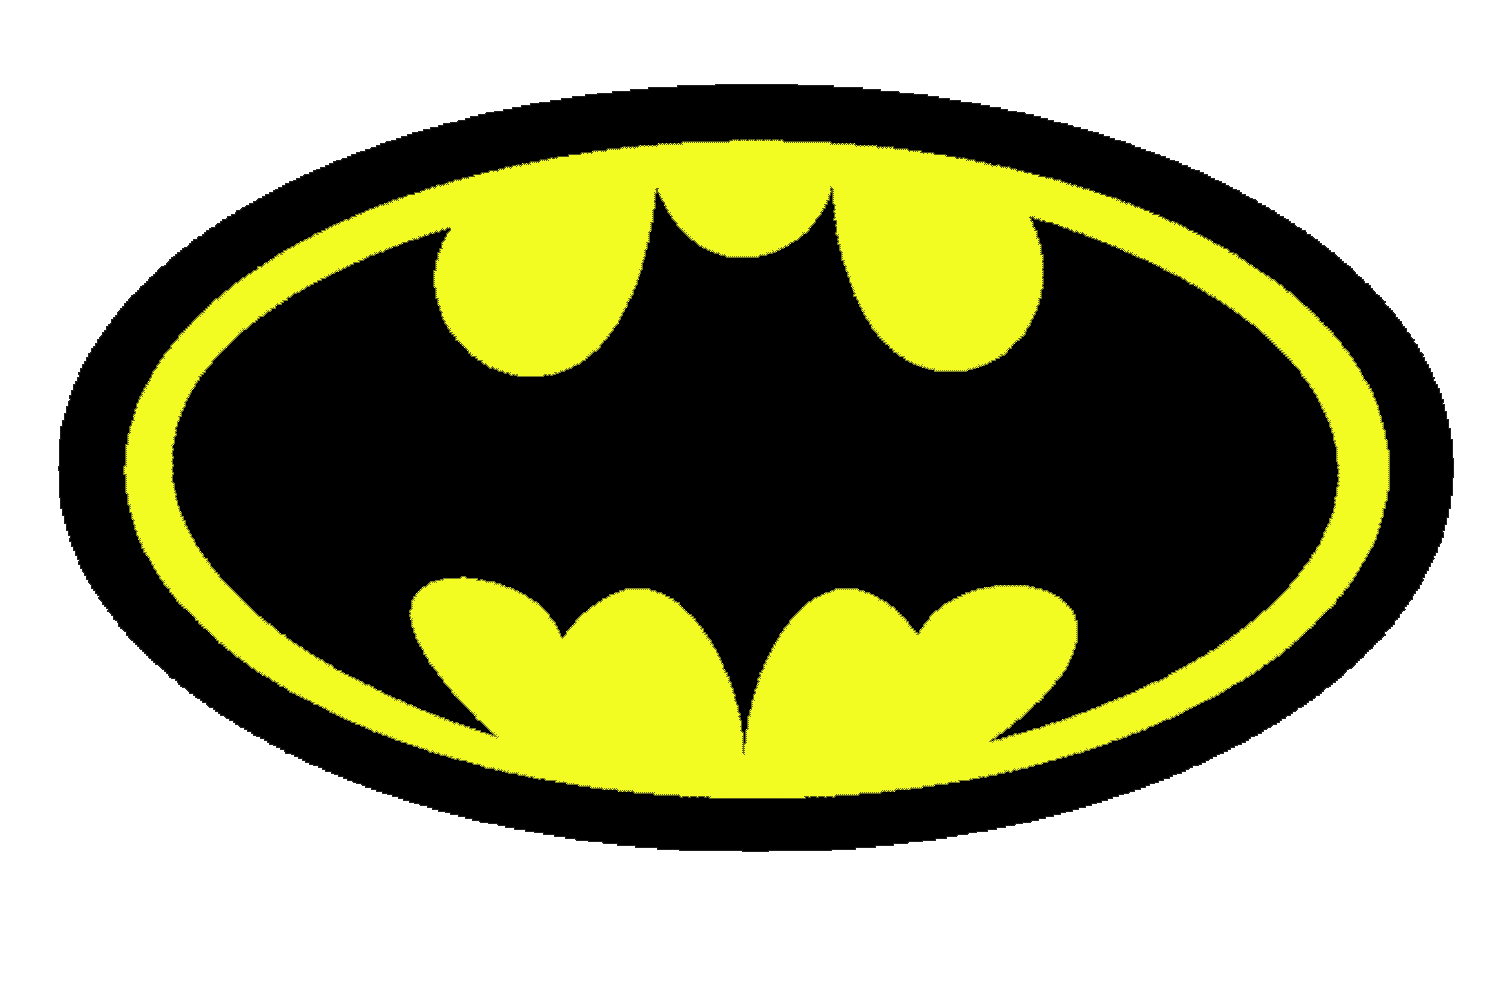 Batman Png - Free Icons and PNG Backgrounds